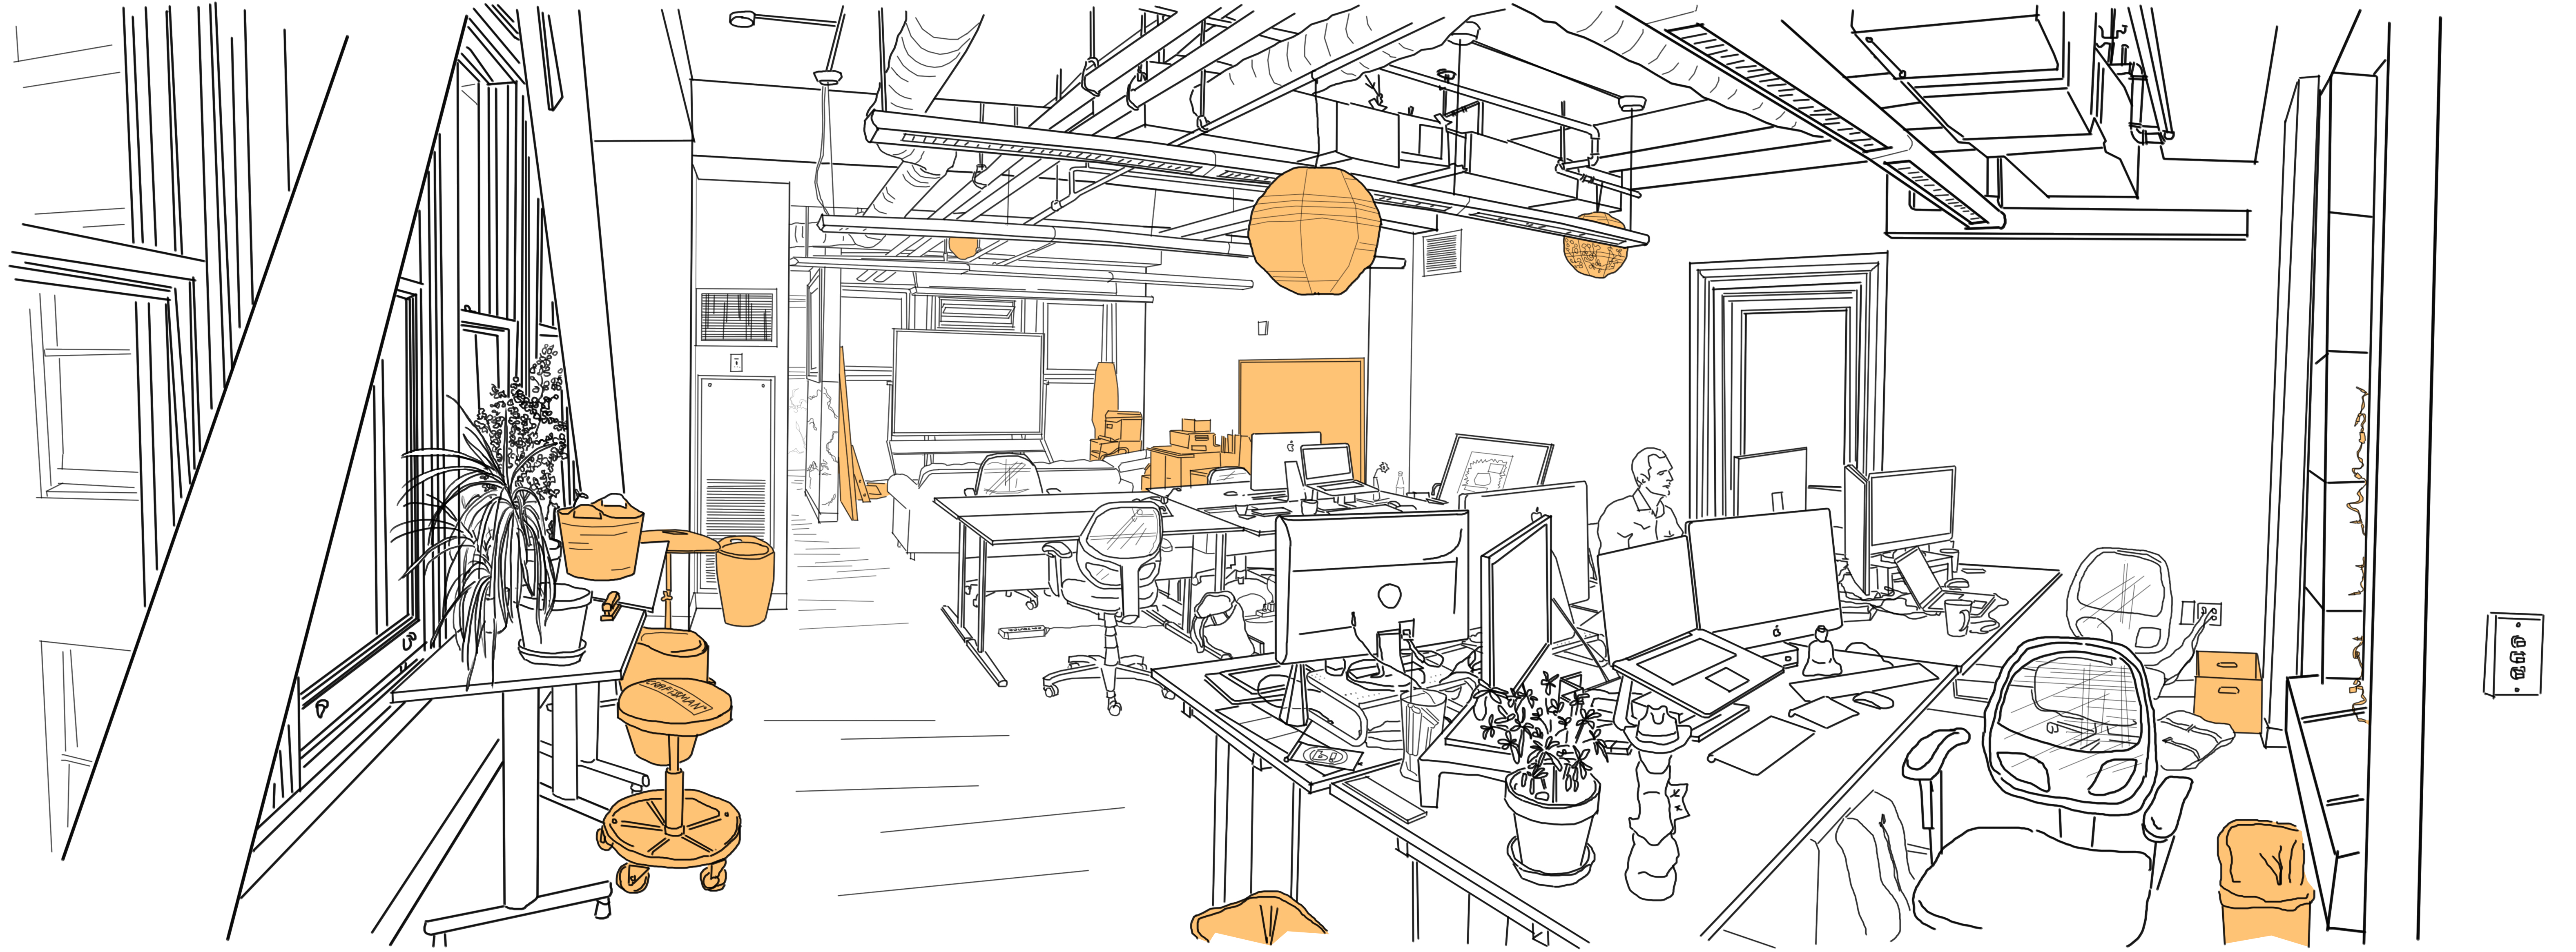 Portent Inc. Creative Services Room: Quick Fixes for Workspaces - Existing Conditions Diagram: Clutter and Lost Objects